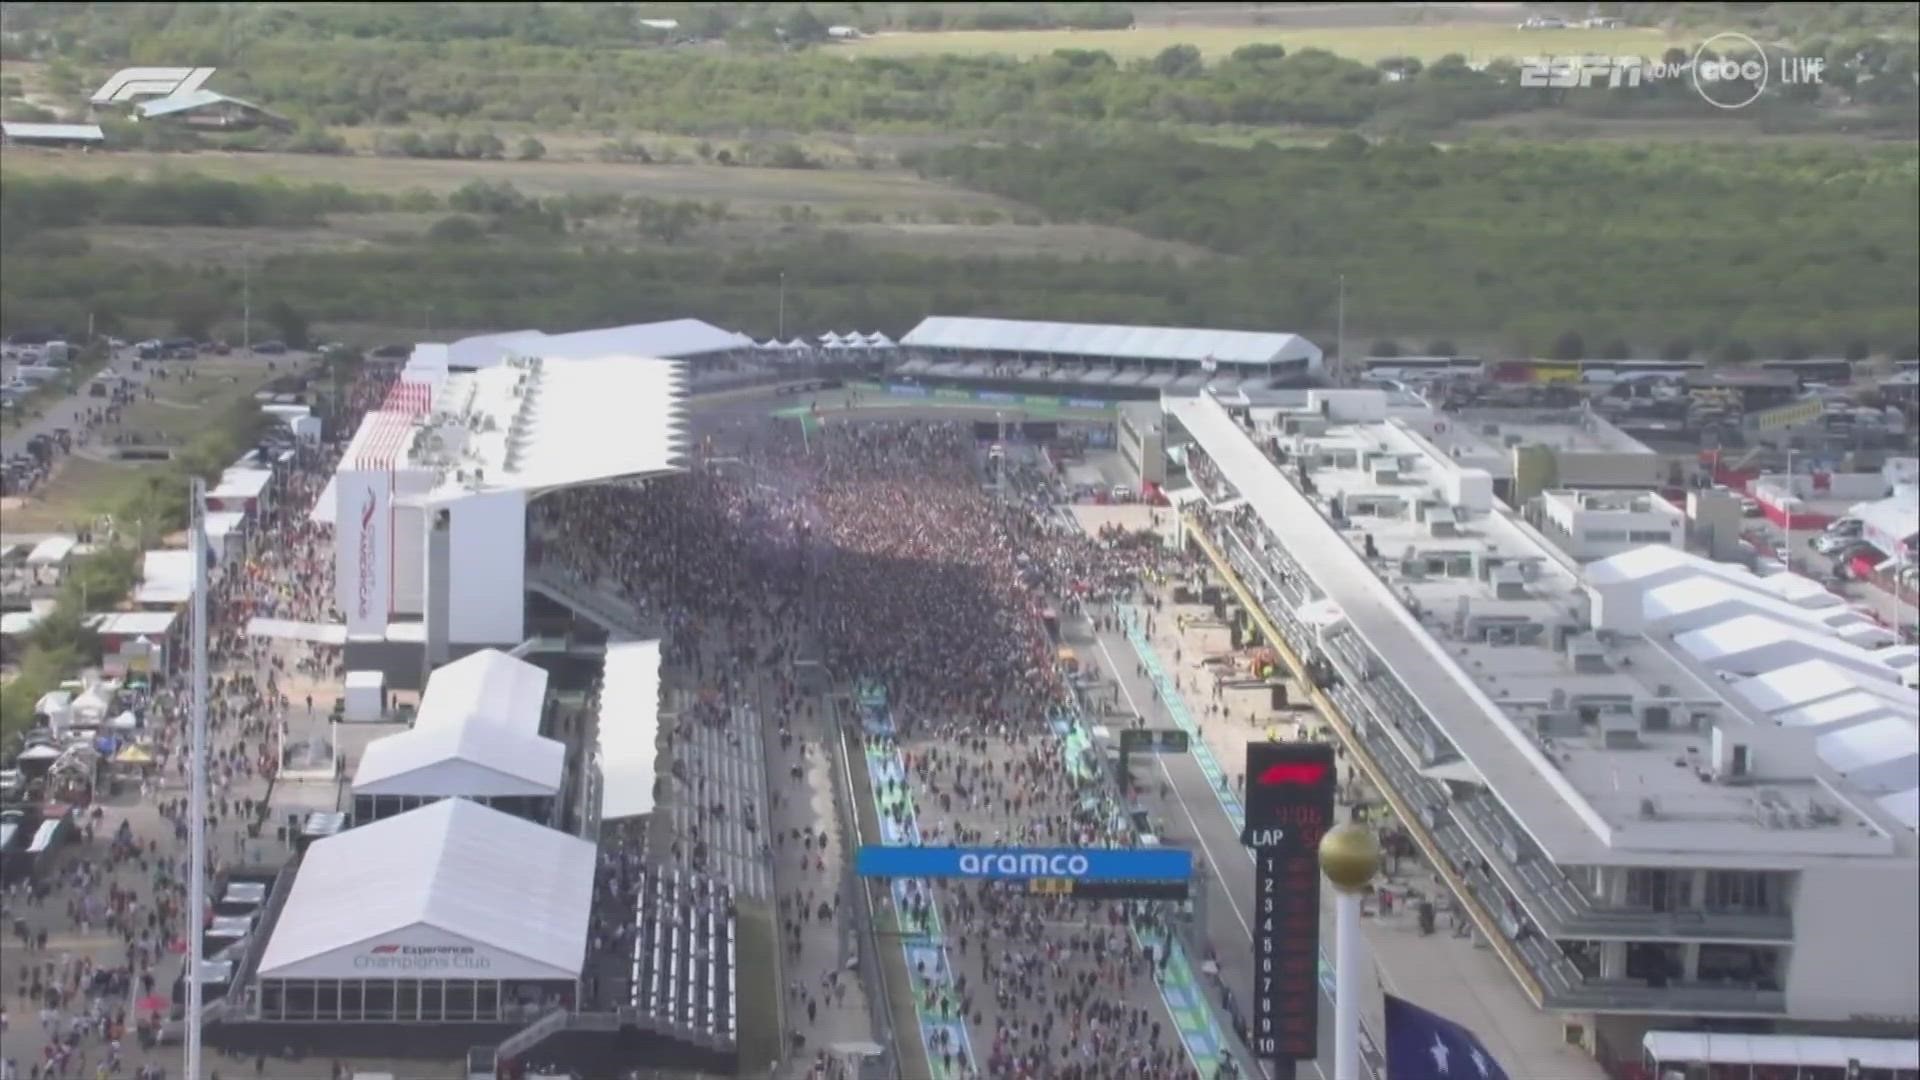 The COTA track was ranked the best to watch the F1 races out of all 23 circuits on the grid. The U.S. Grand Prix beat out Monte Carlo and Abu Dhabi.